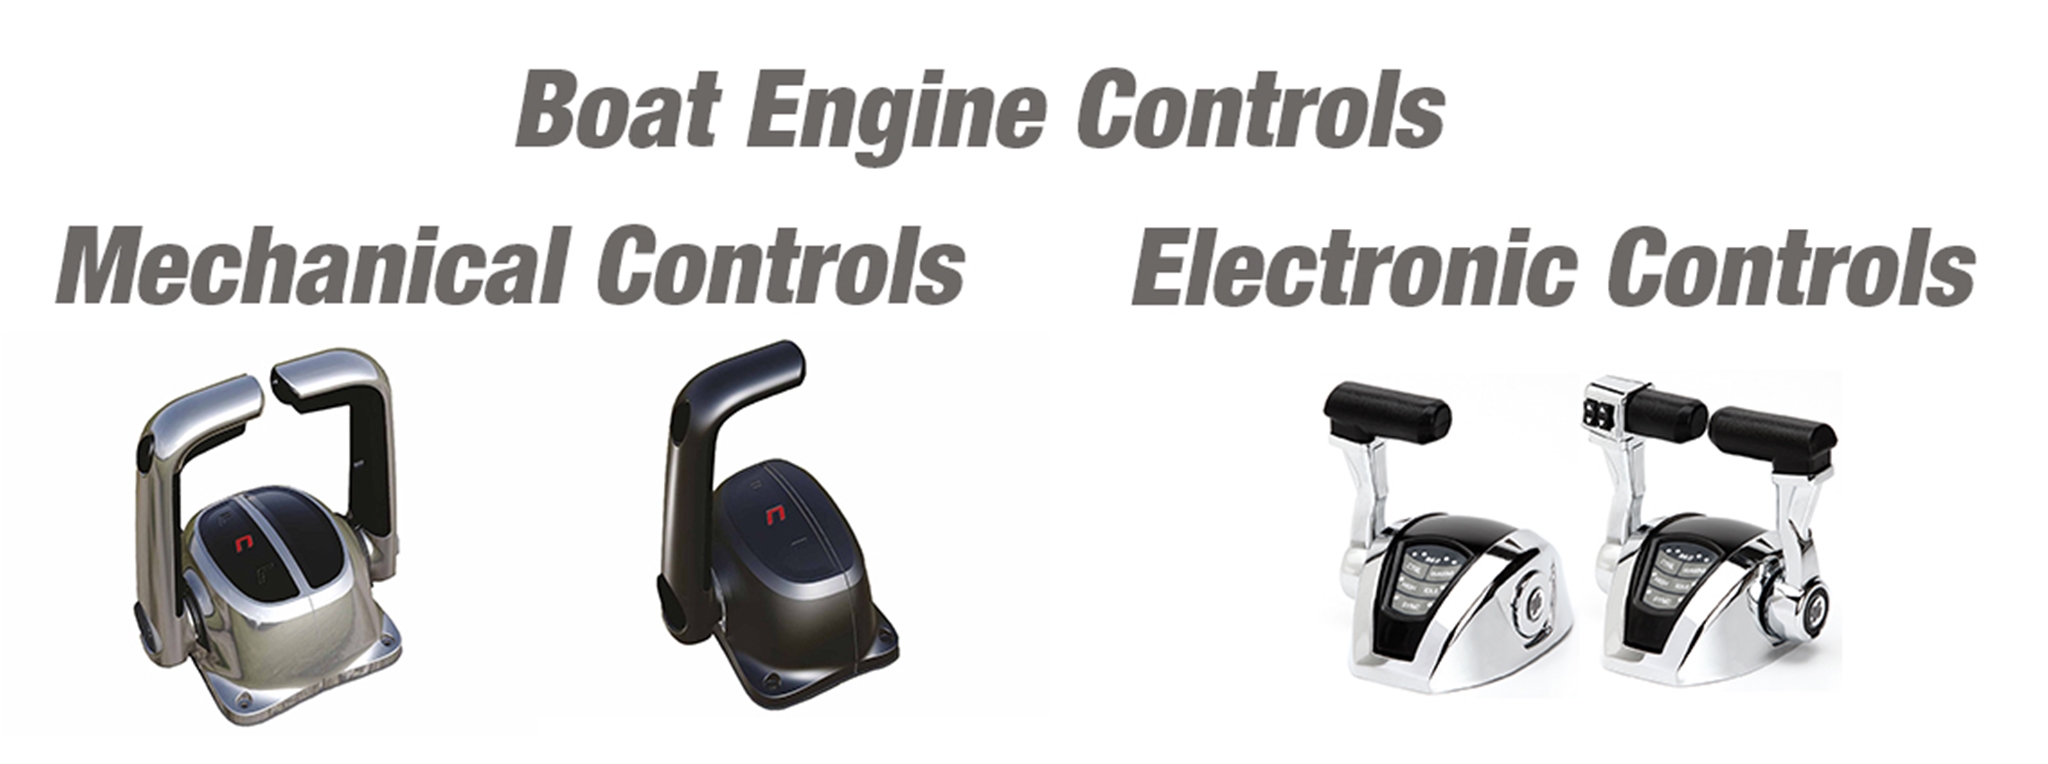 Boat Engine Controls for all makes and models of boats!